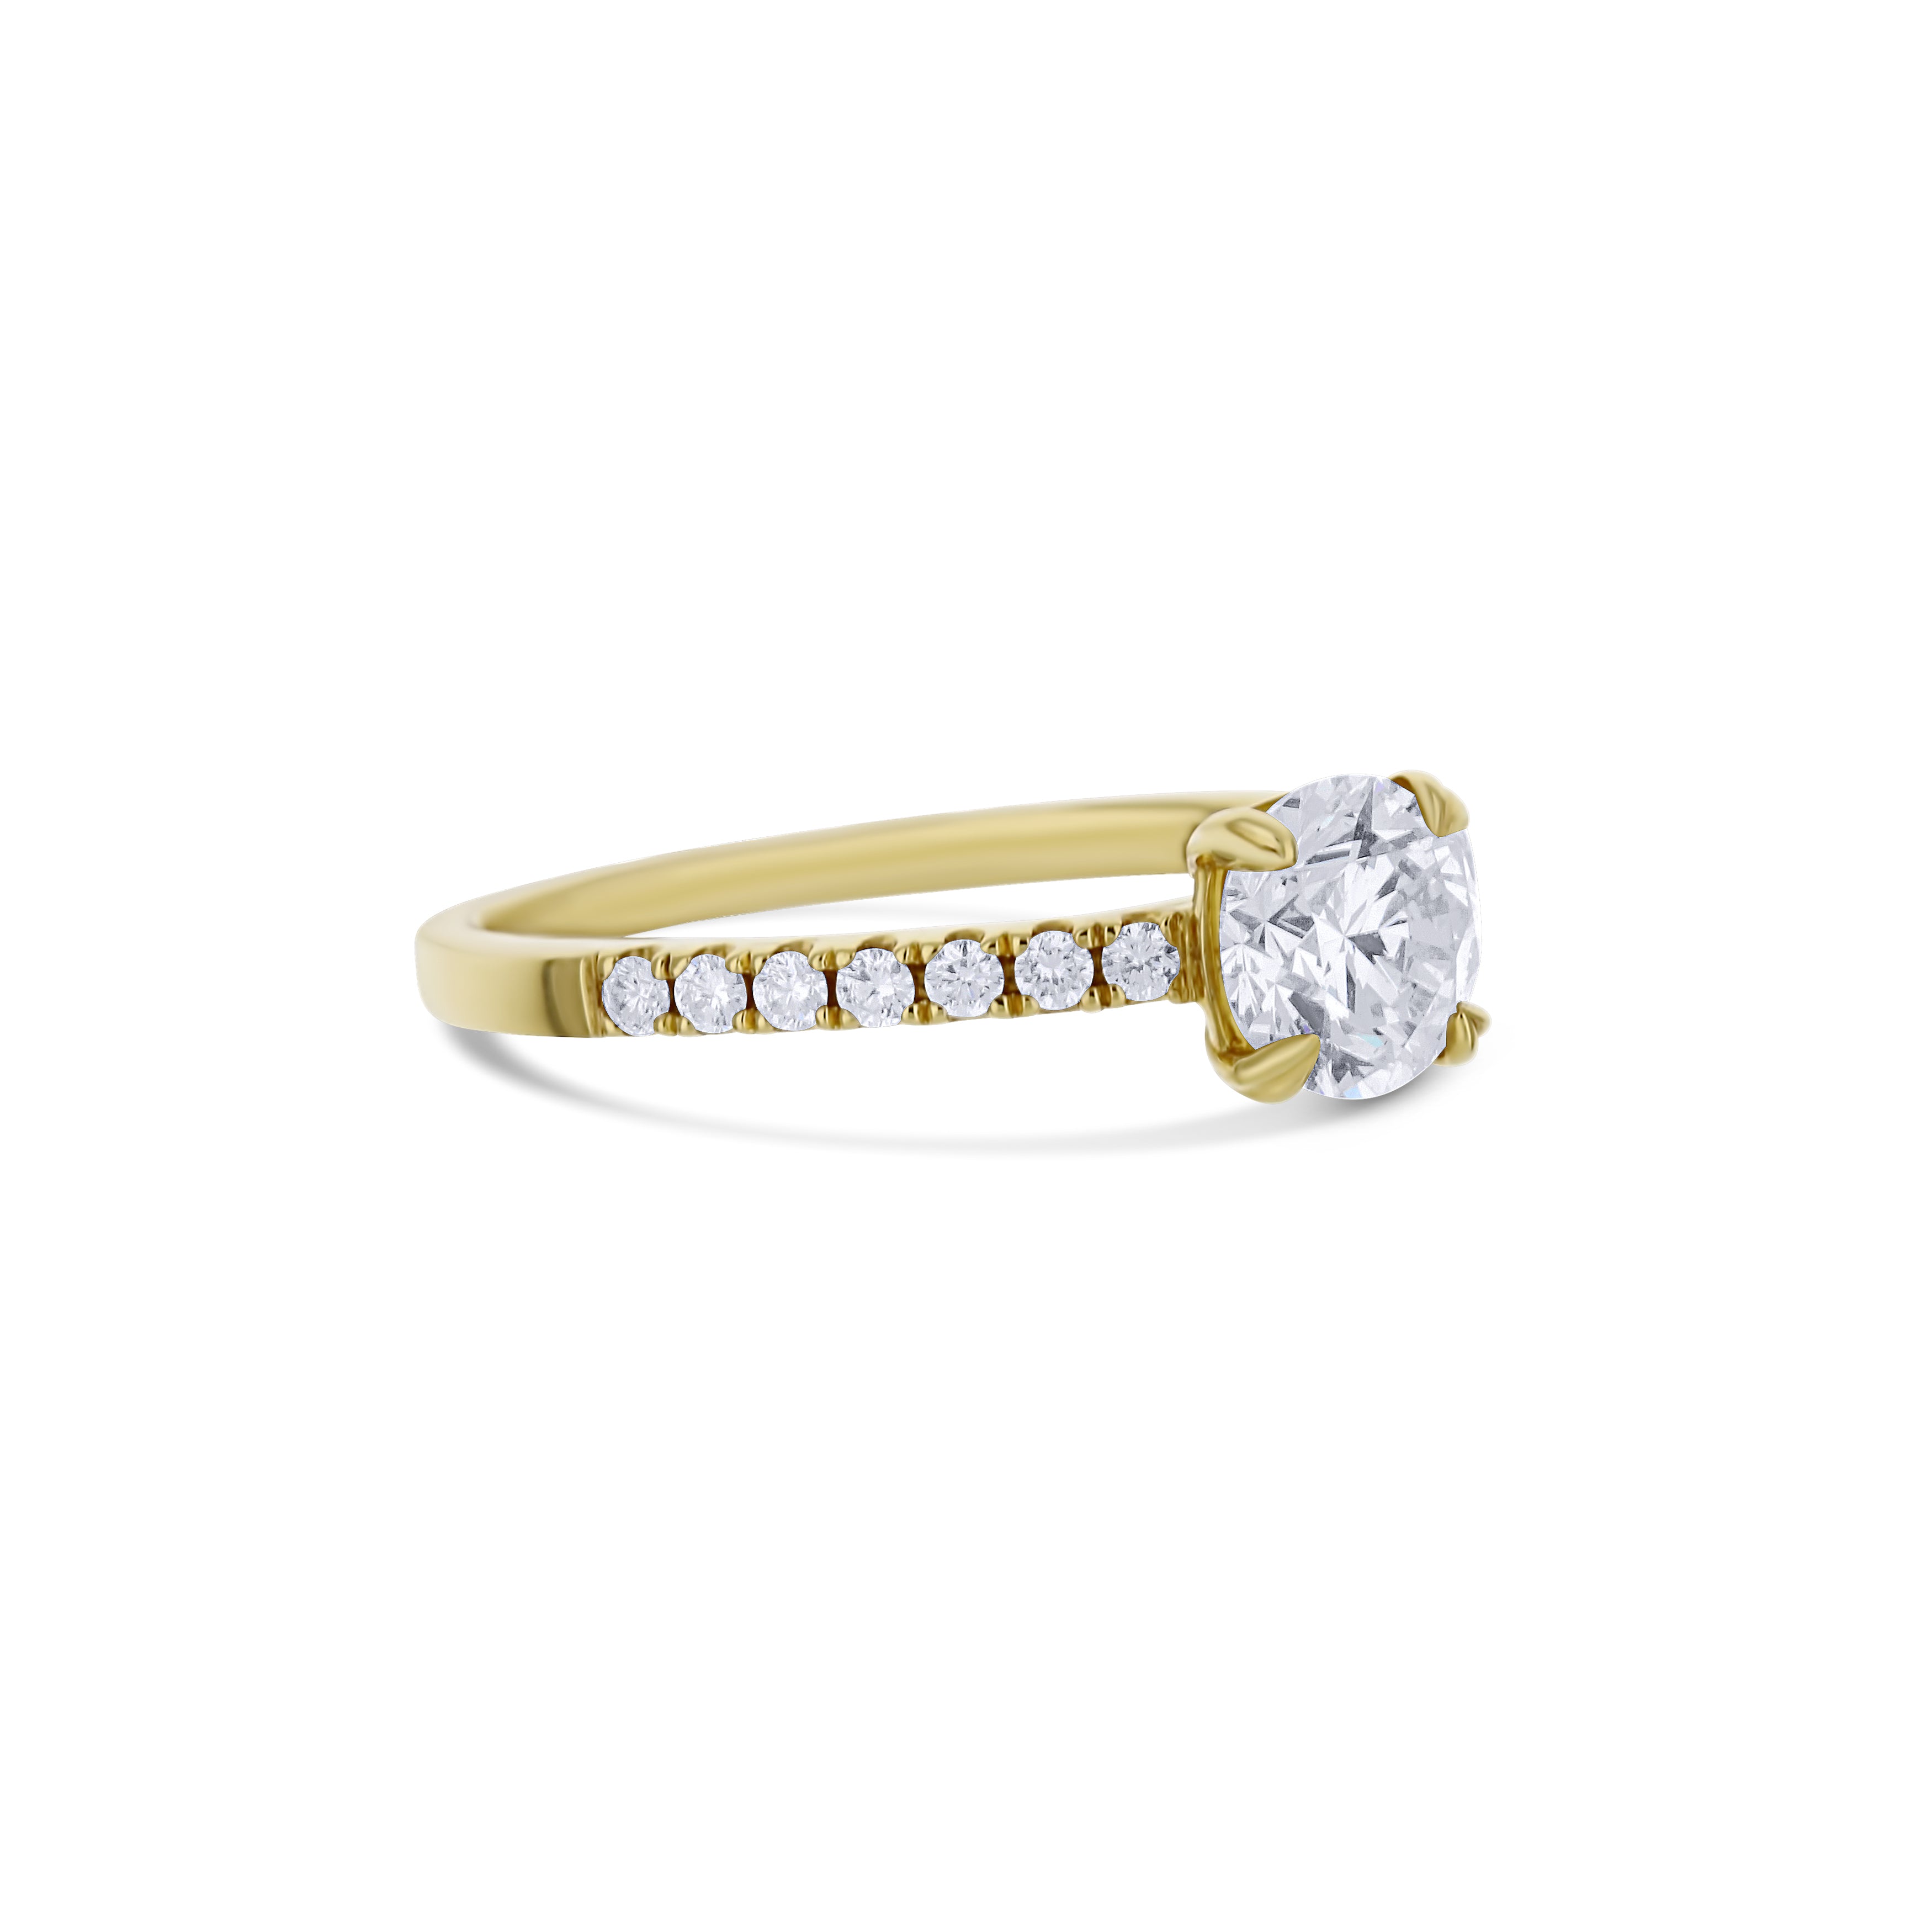 18K Yellow Gold Ring With A 0.93 Carat Round Diamond With A Half Diamond Band